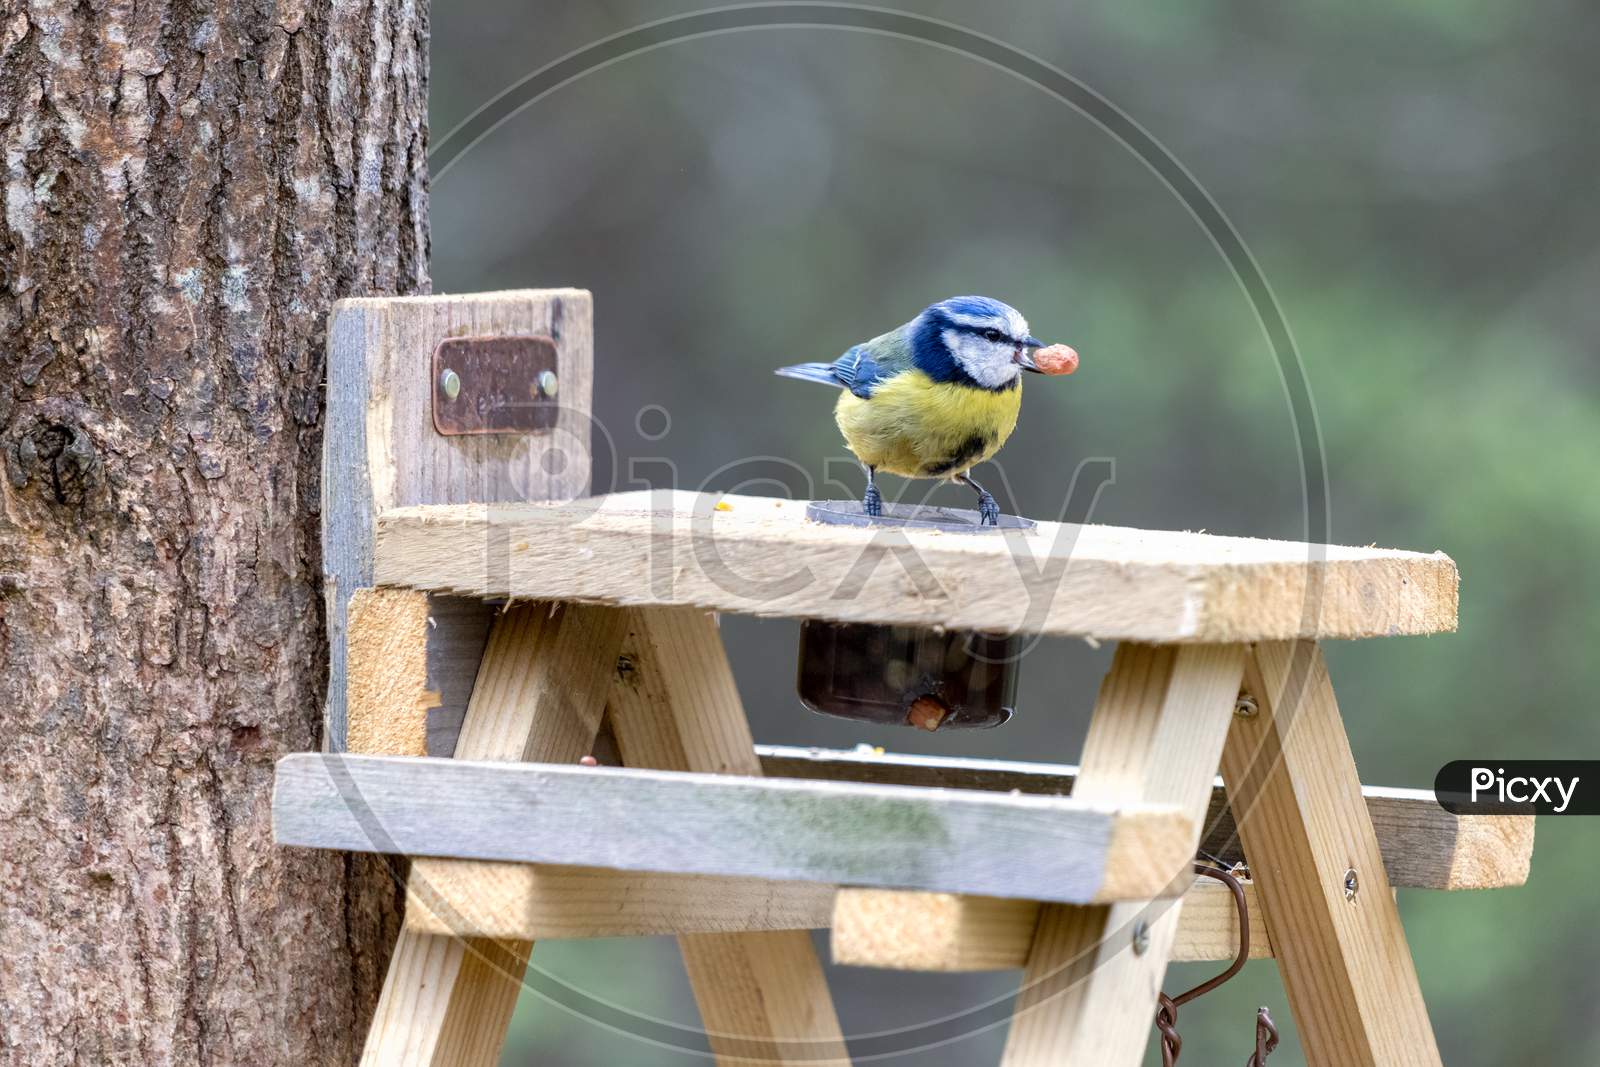 Blue Tit On A Wooden Table With A Peanut In Its Beak